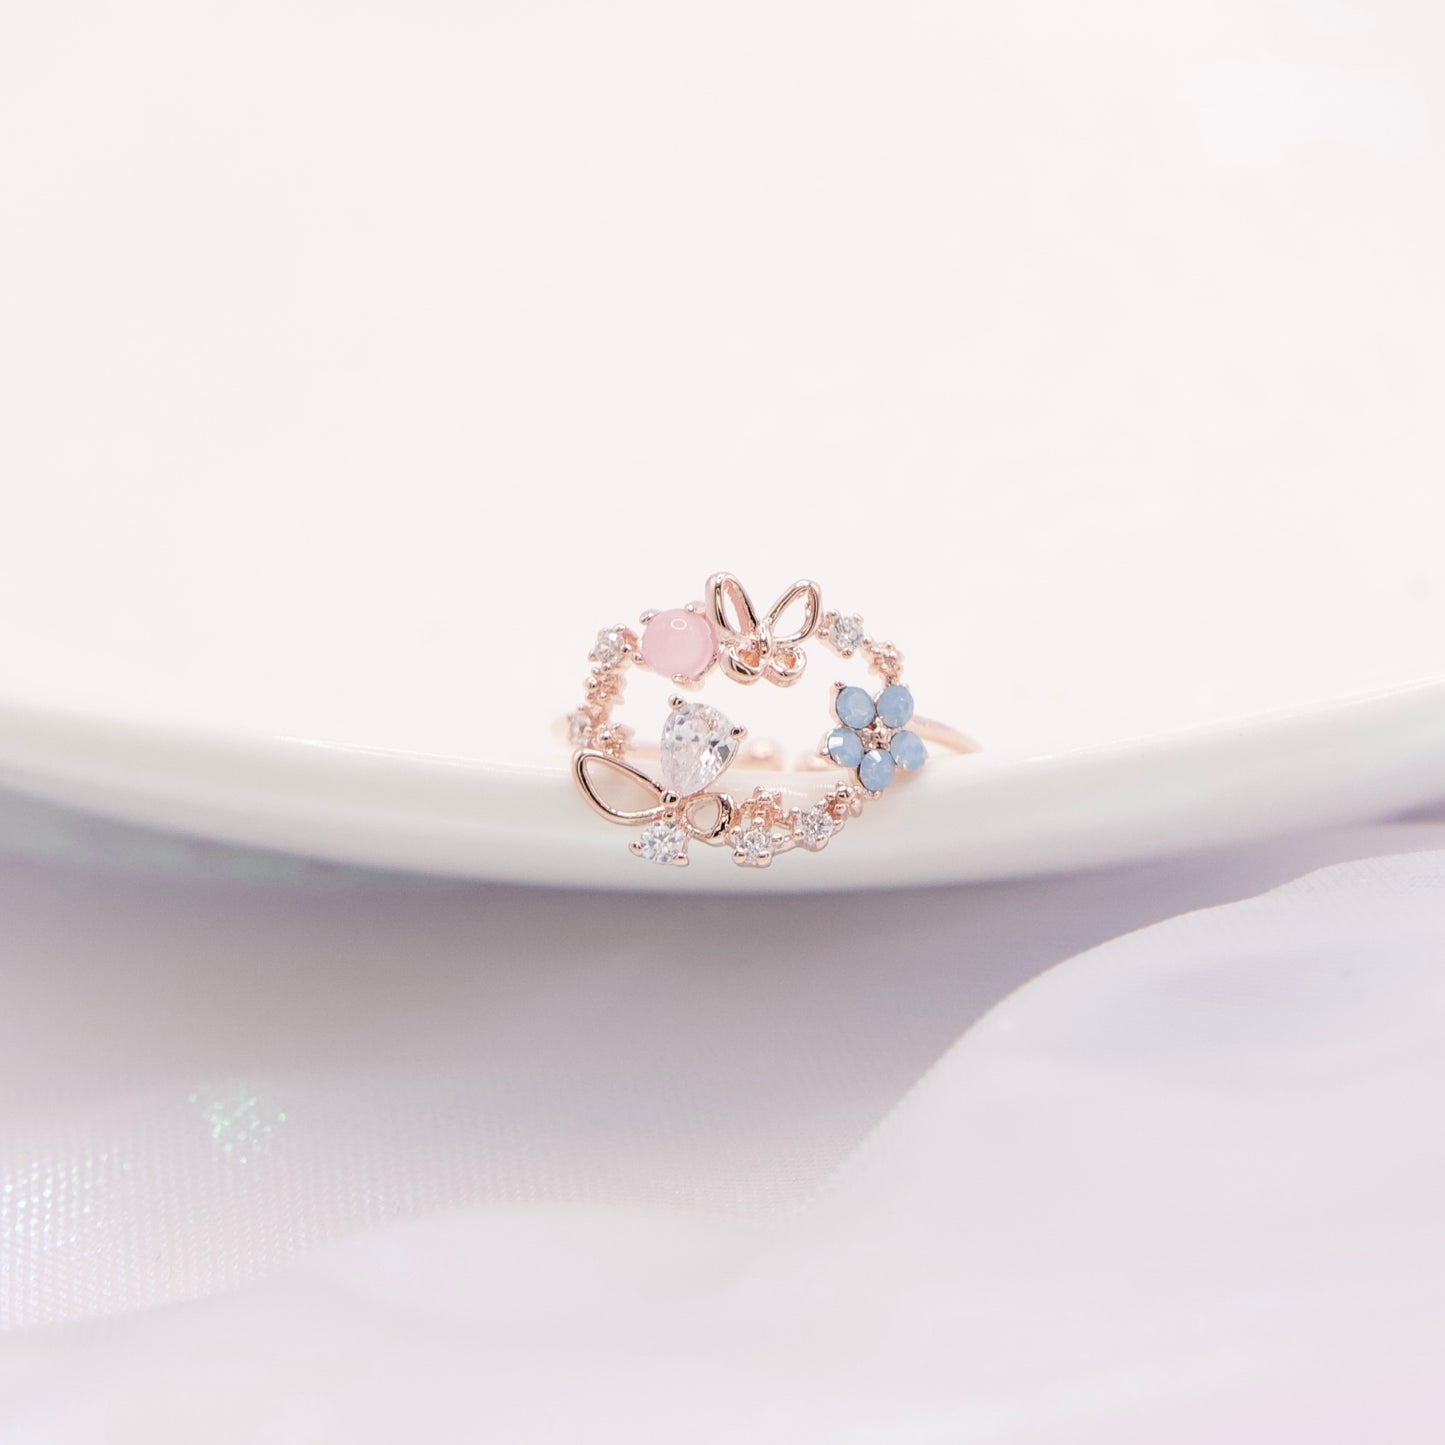 Butterfly Fairy Garden Adjustable Ring - 3 colors